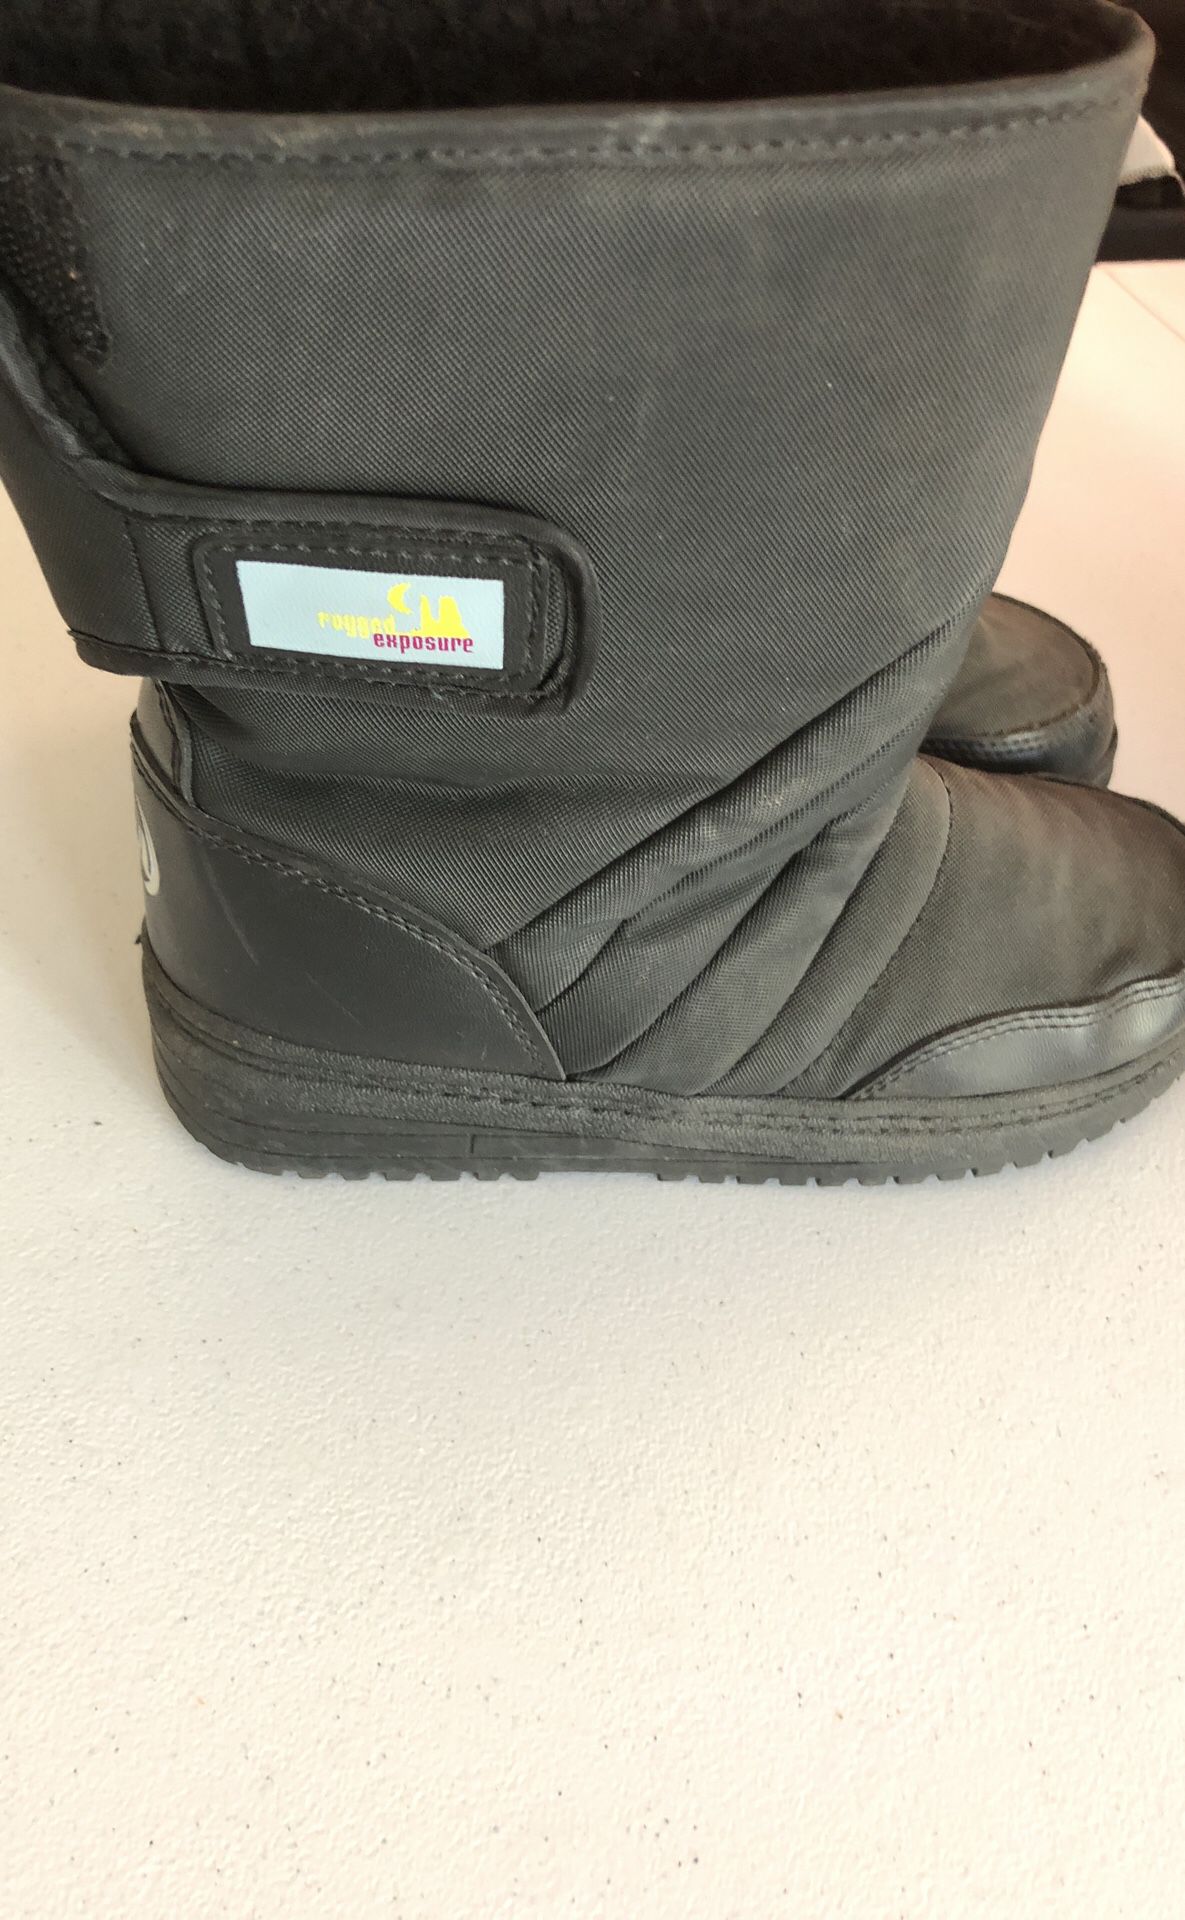 Snow boots size 4